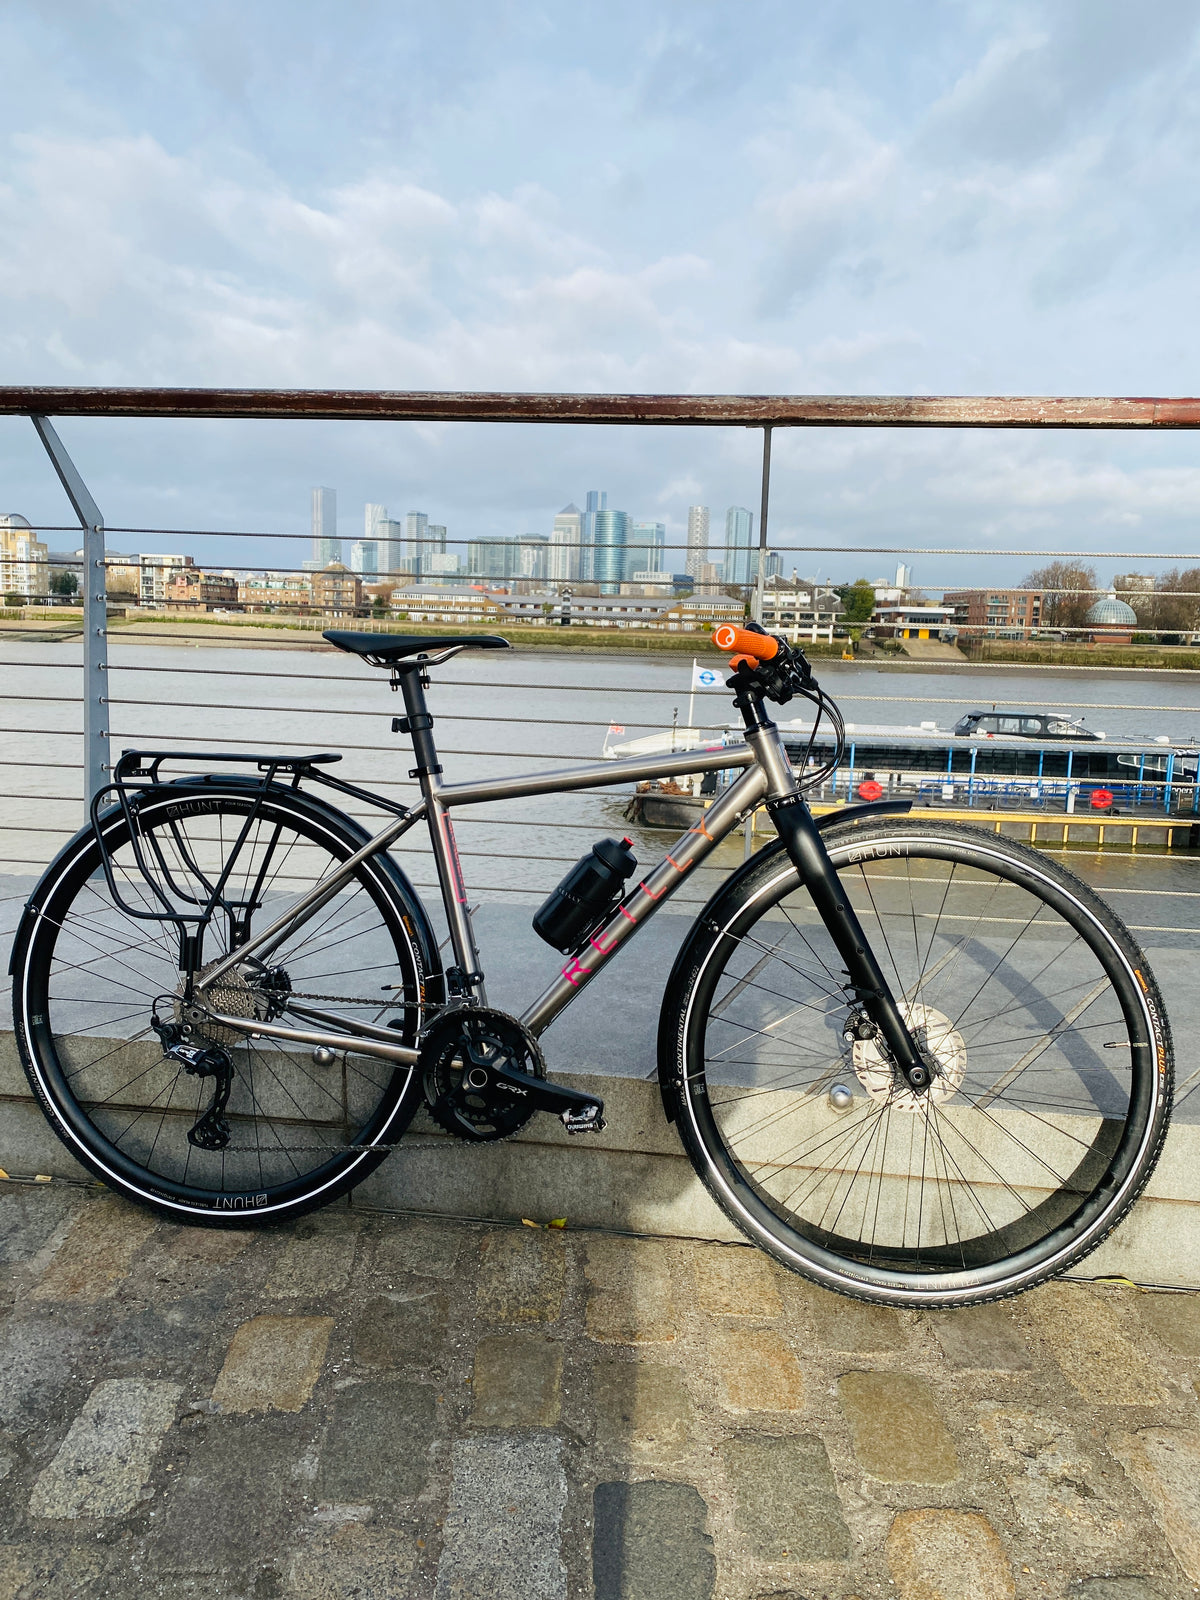 Gradient gravel bike with Pink logo and flat handlebars parked against a railing.  River Thames in the background with Canary Wharf in the distance  